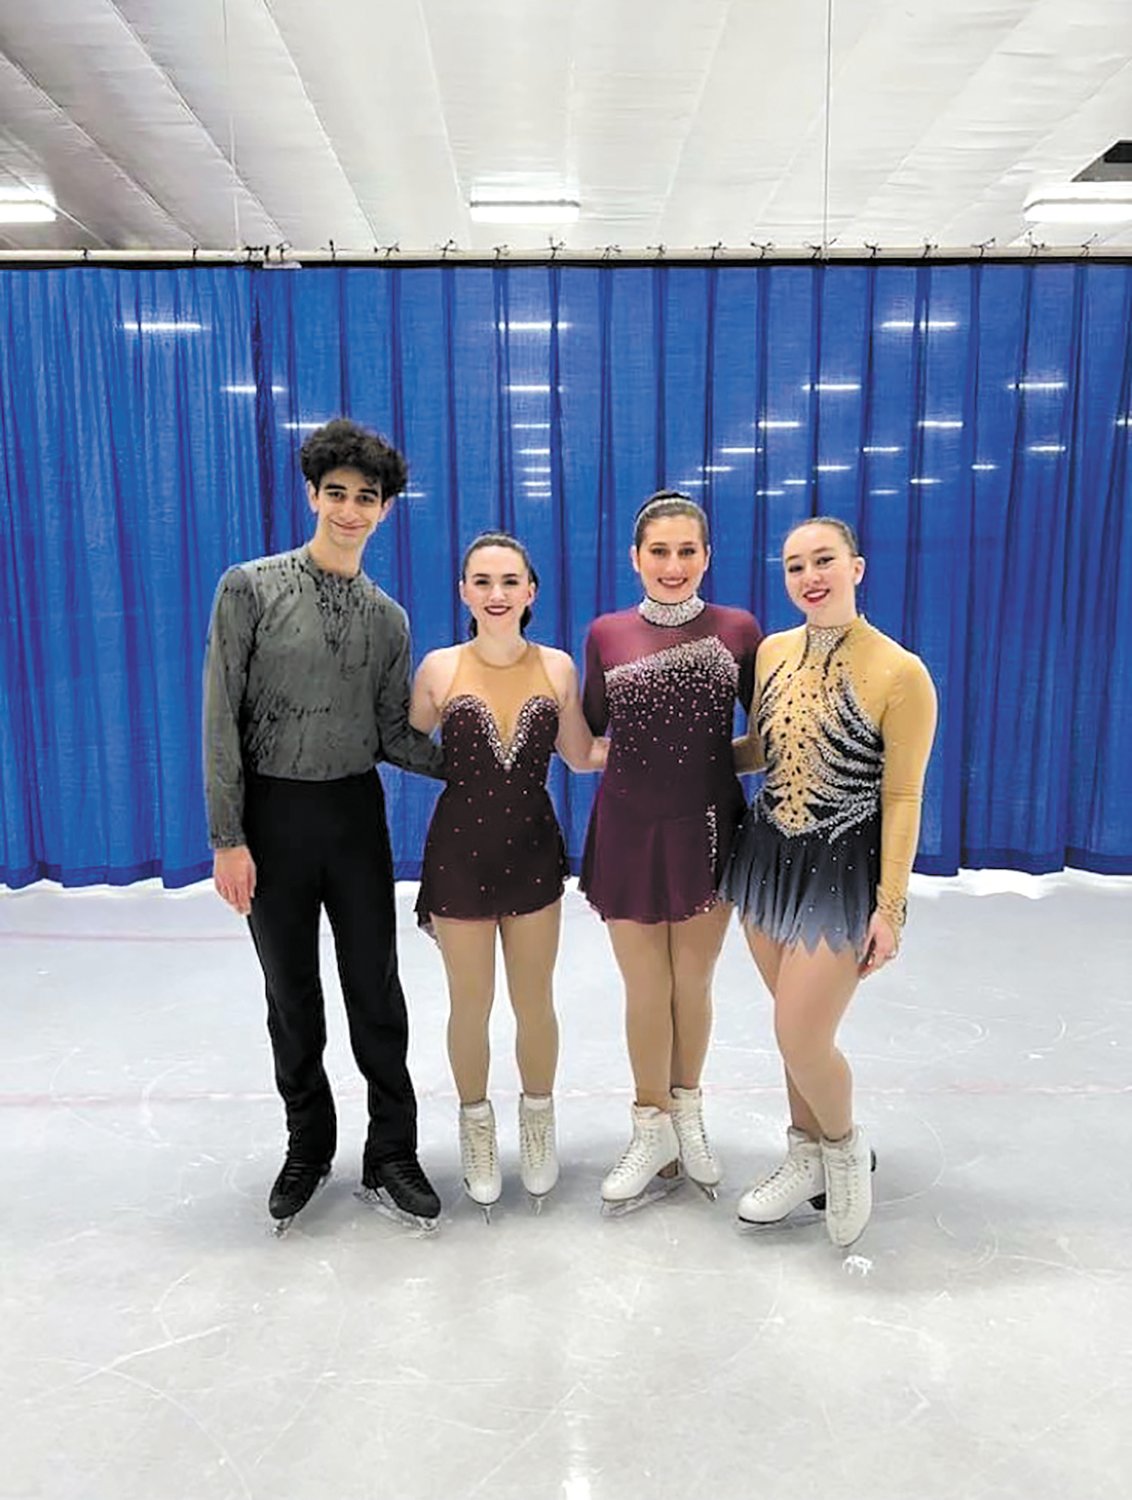 SENIOR SKATERS: Graduating Seniors take a final moment to pose for a photo op. L-R : Zachary Grant, Coco Collete, Kristen Carcieri and Johnna Eunis.